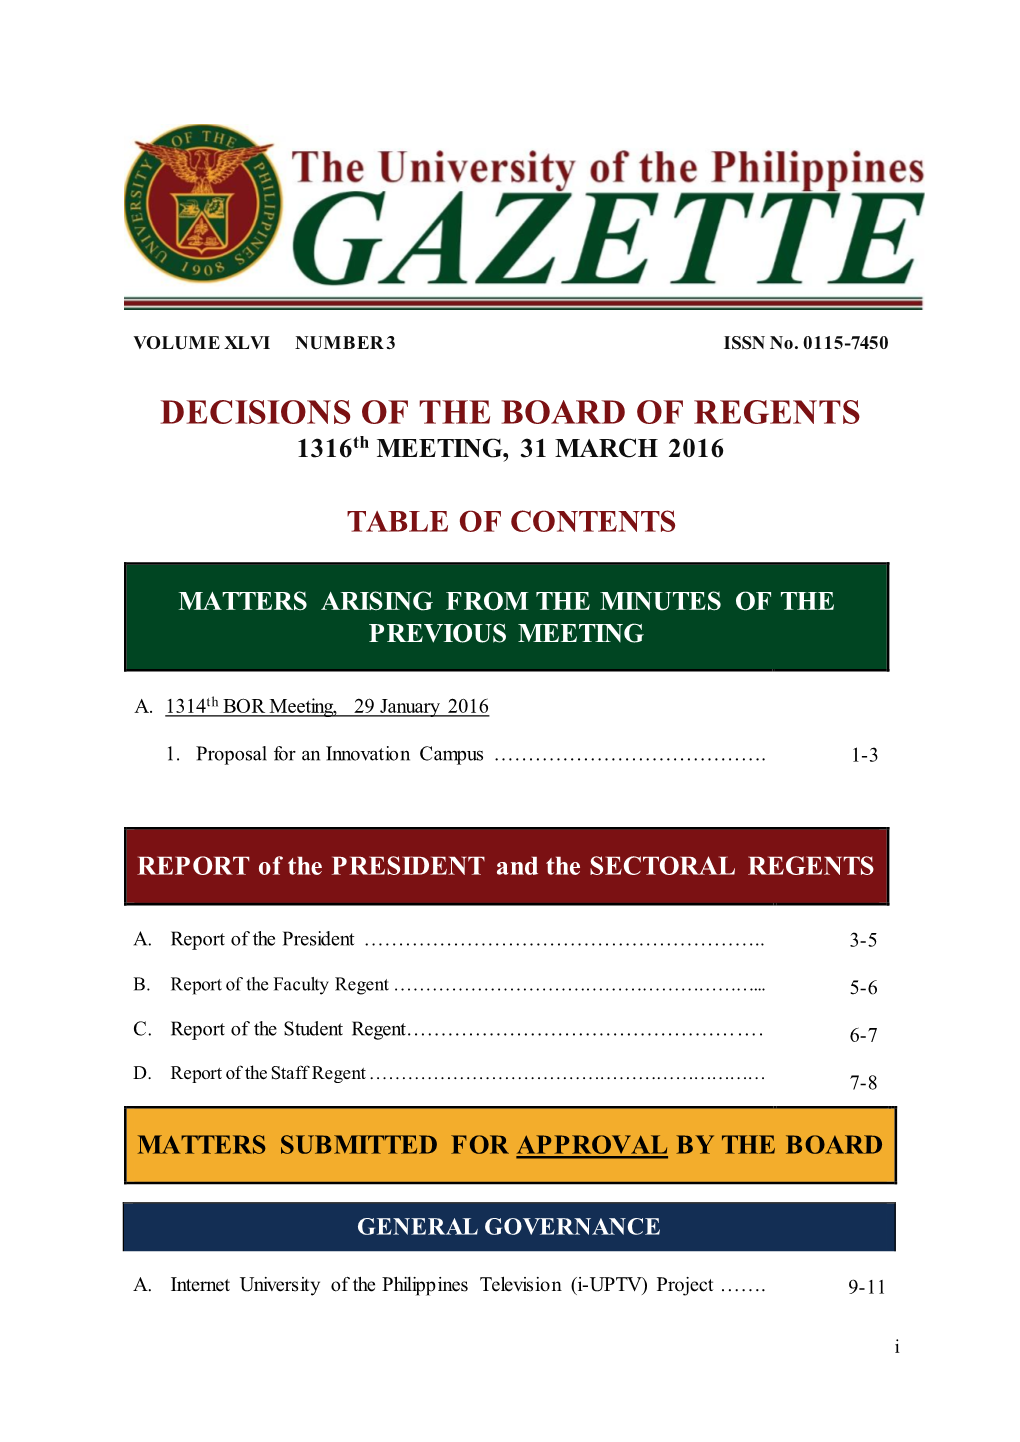 DECISIONS of the BOARD of REGENTS 1316Th MEETING, 31 MARCH 2016